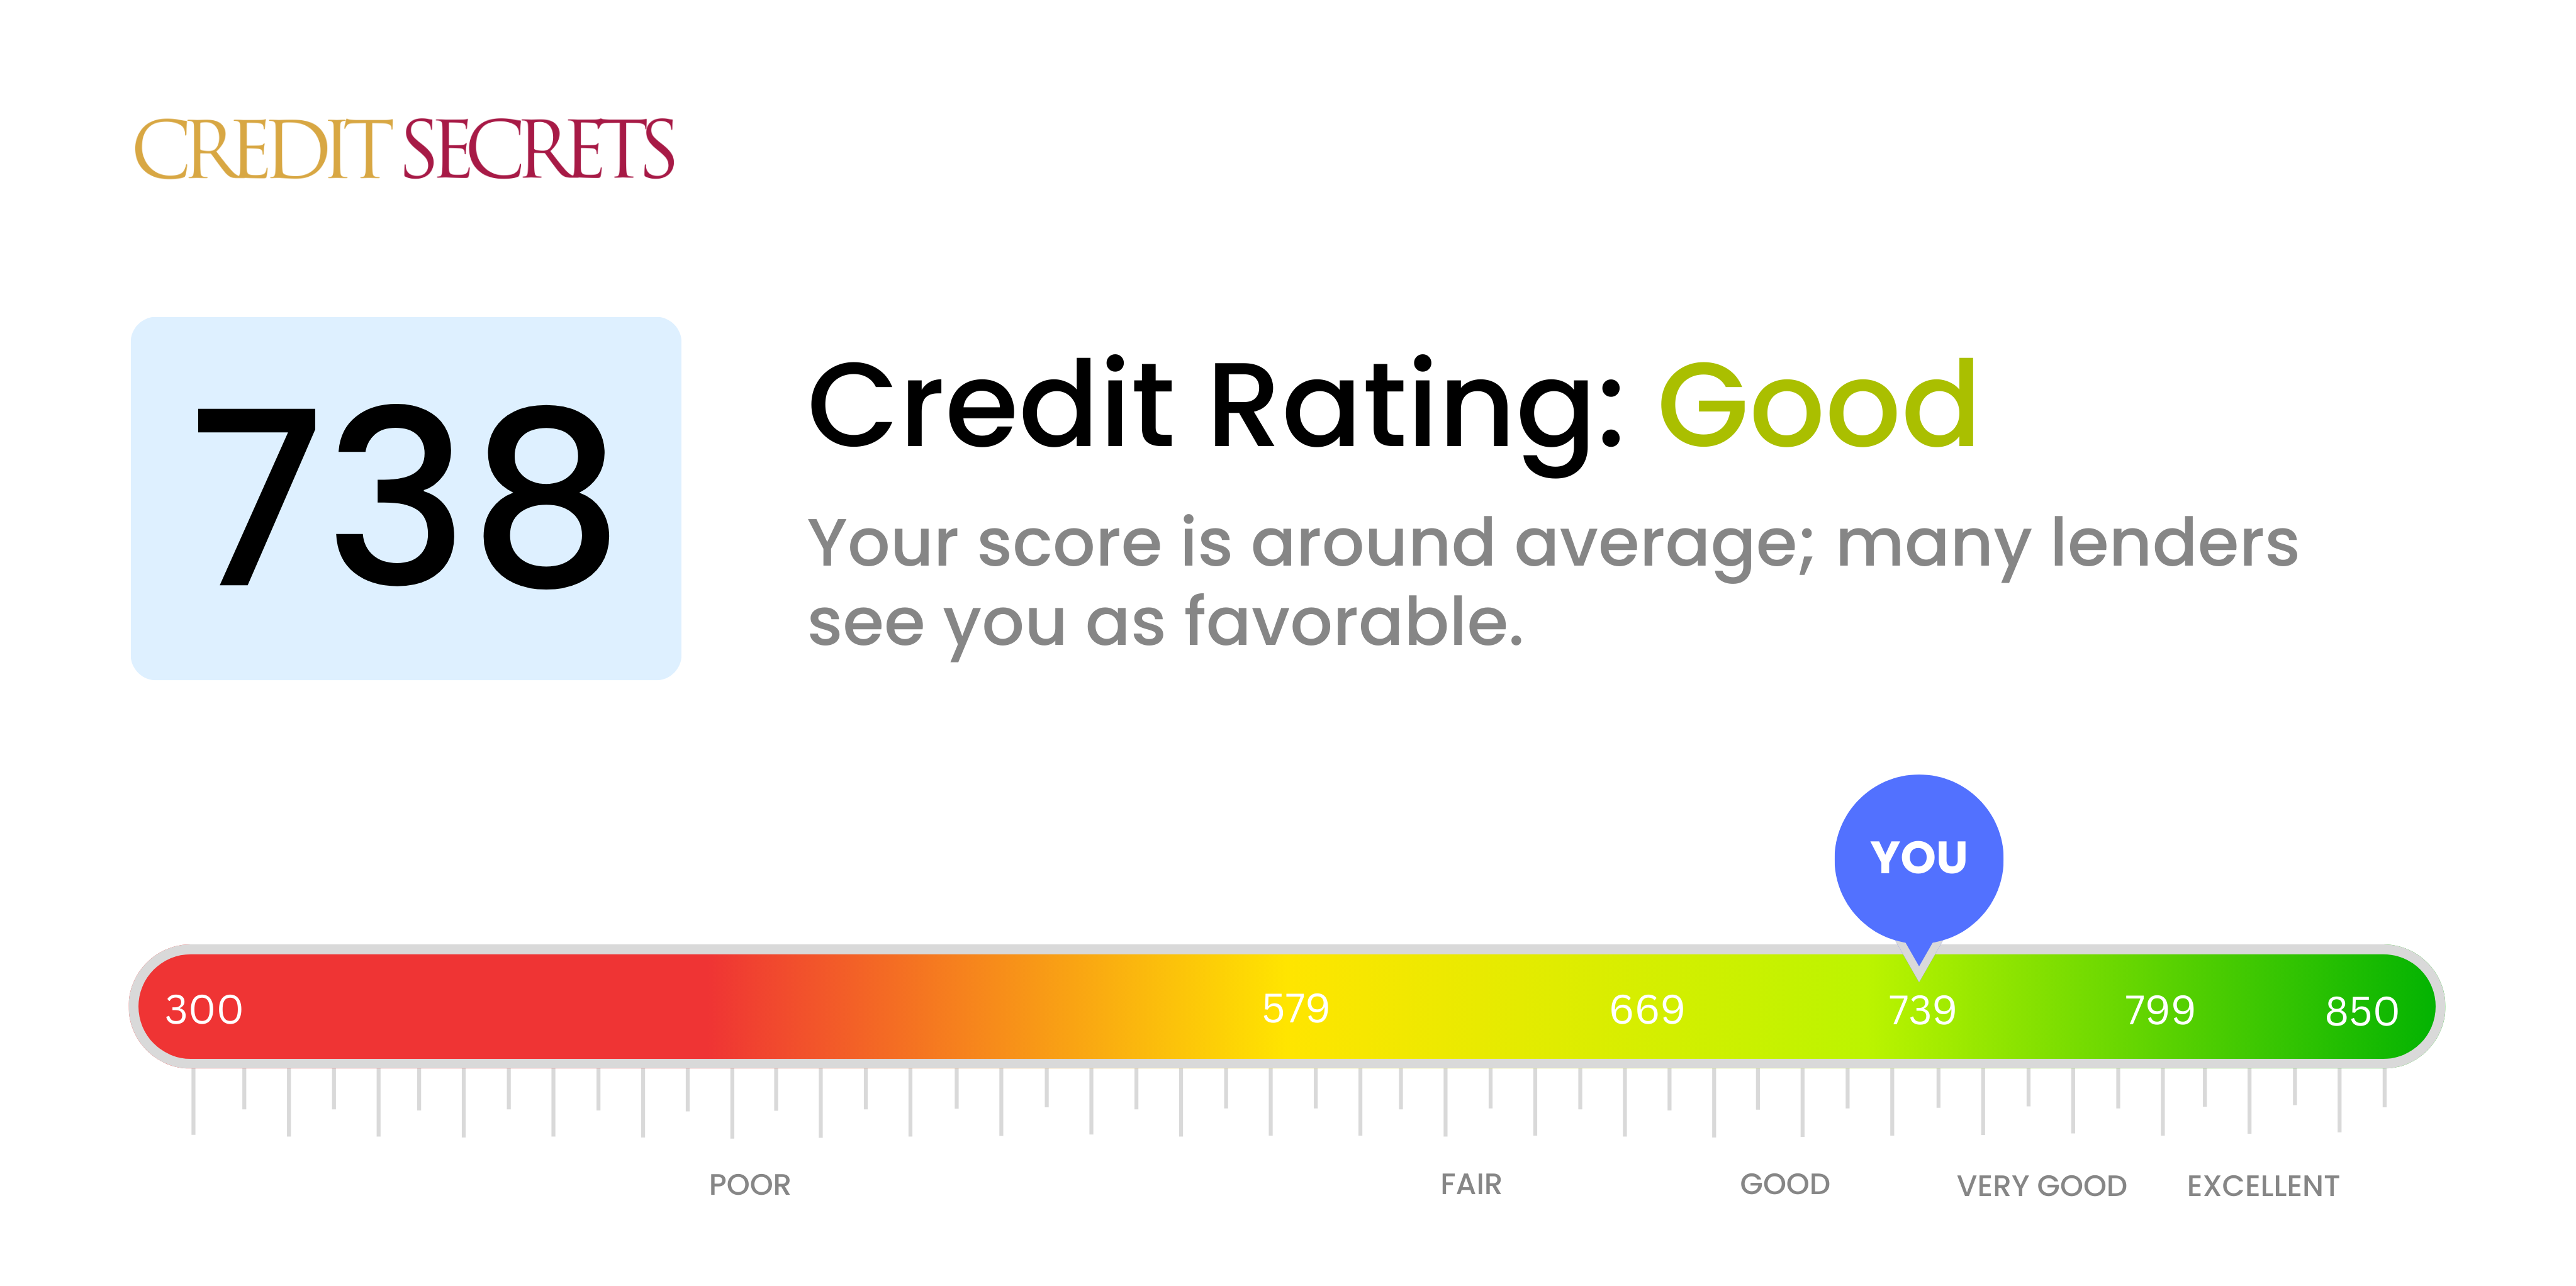 Is 738 a good credit score?